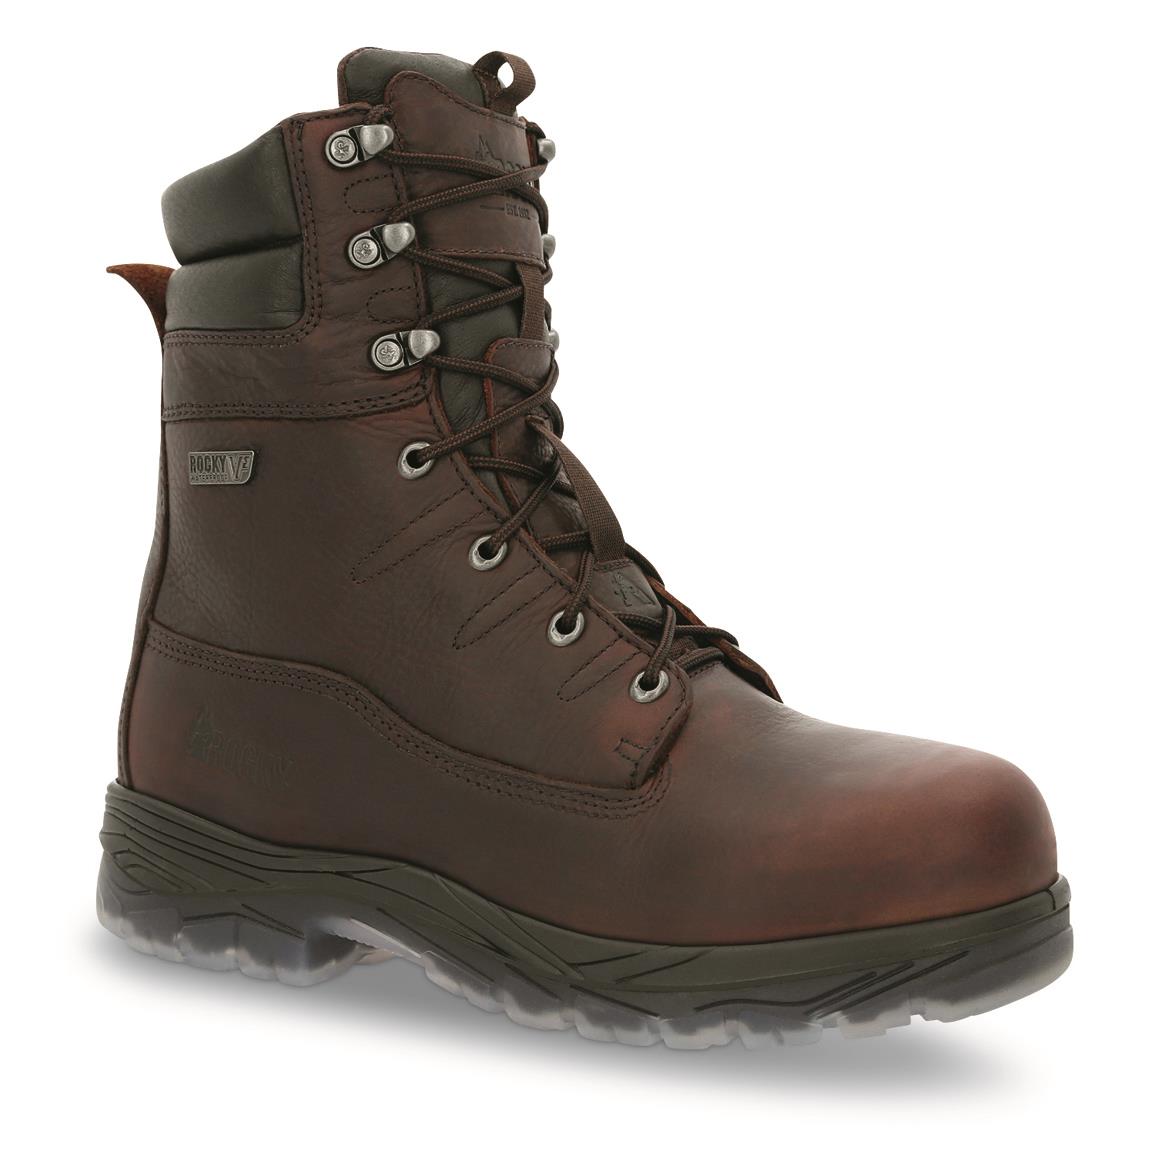 Rocky Men's Forge Waterproof 8" Composite Toe Work Boots, Brown